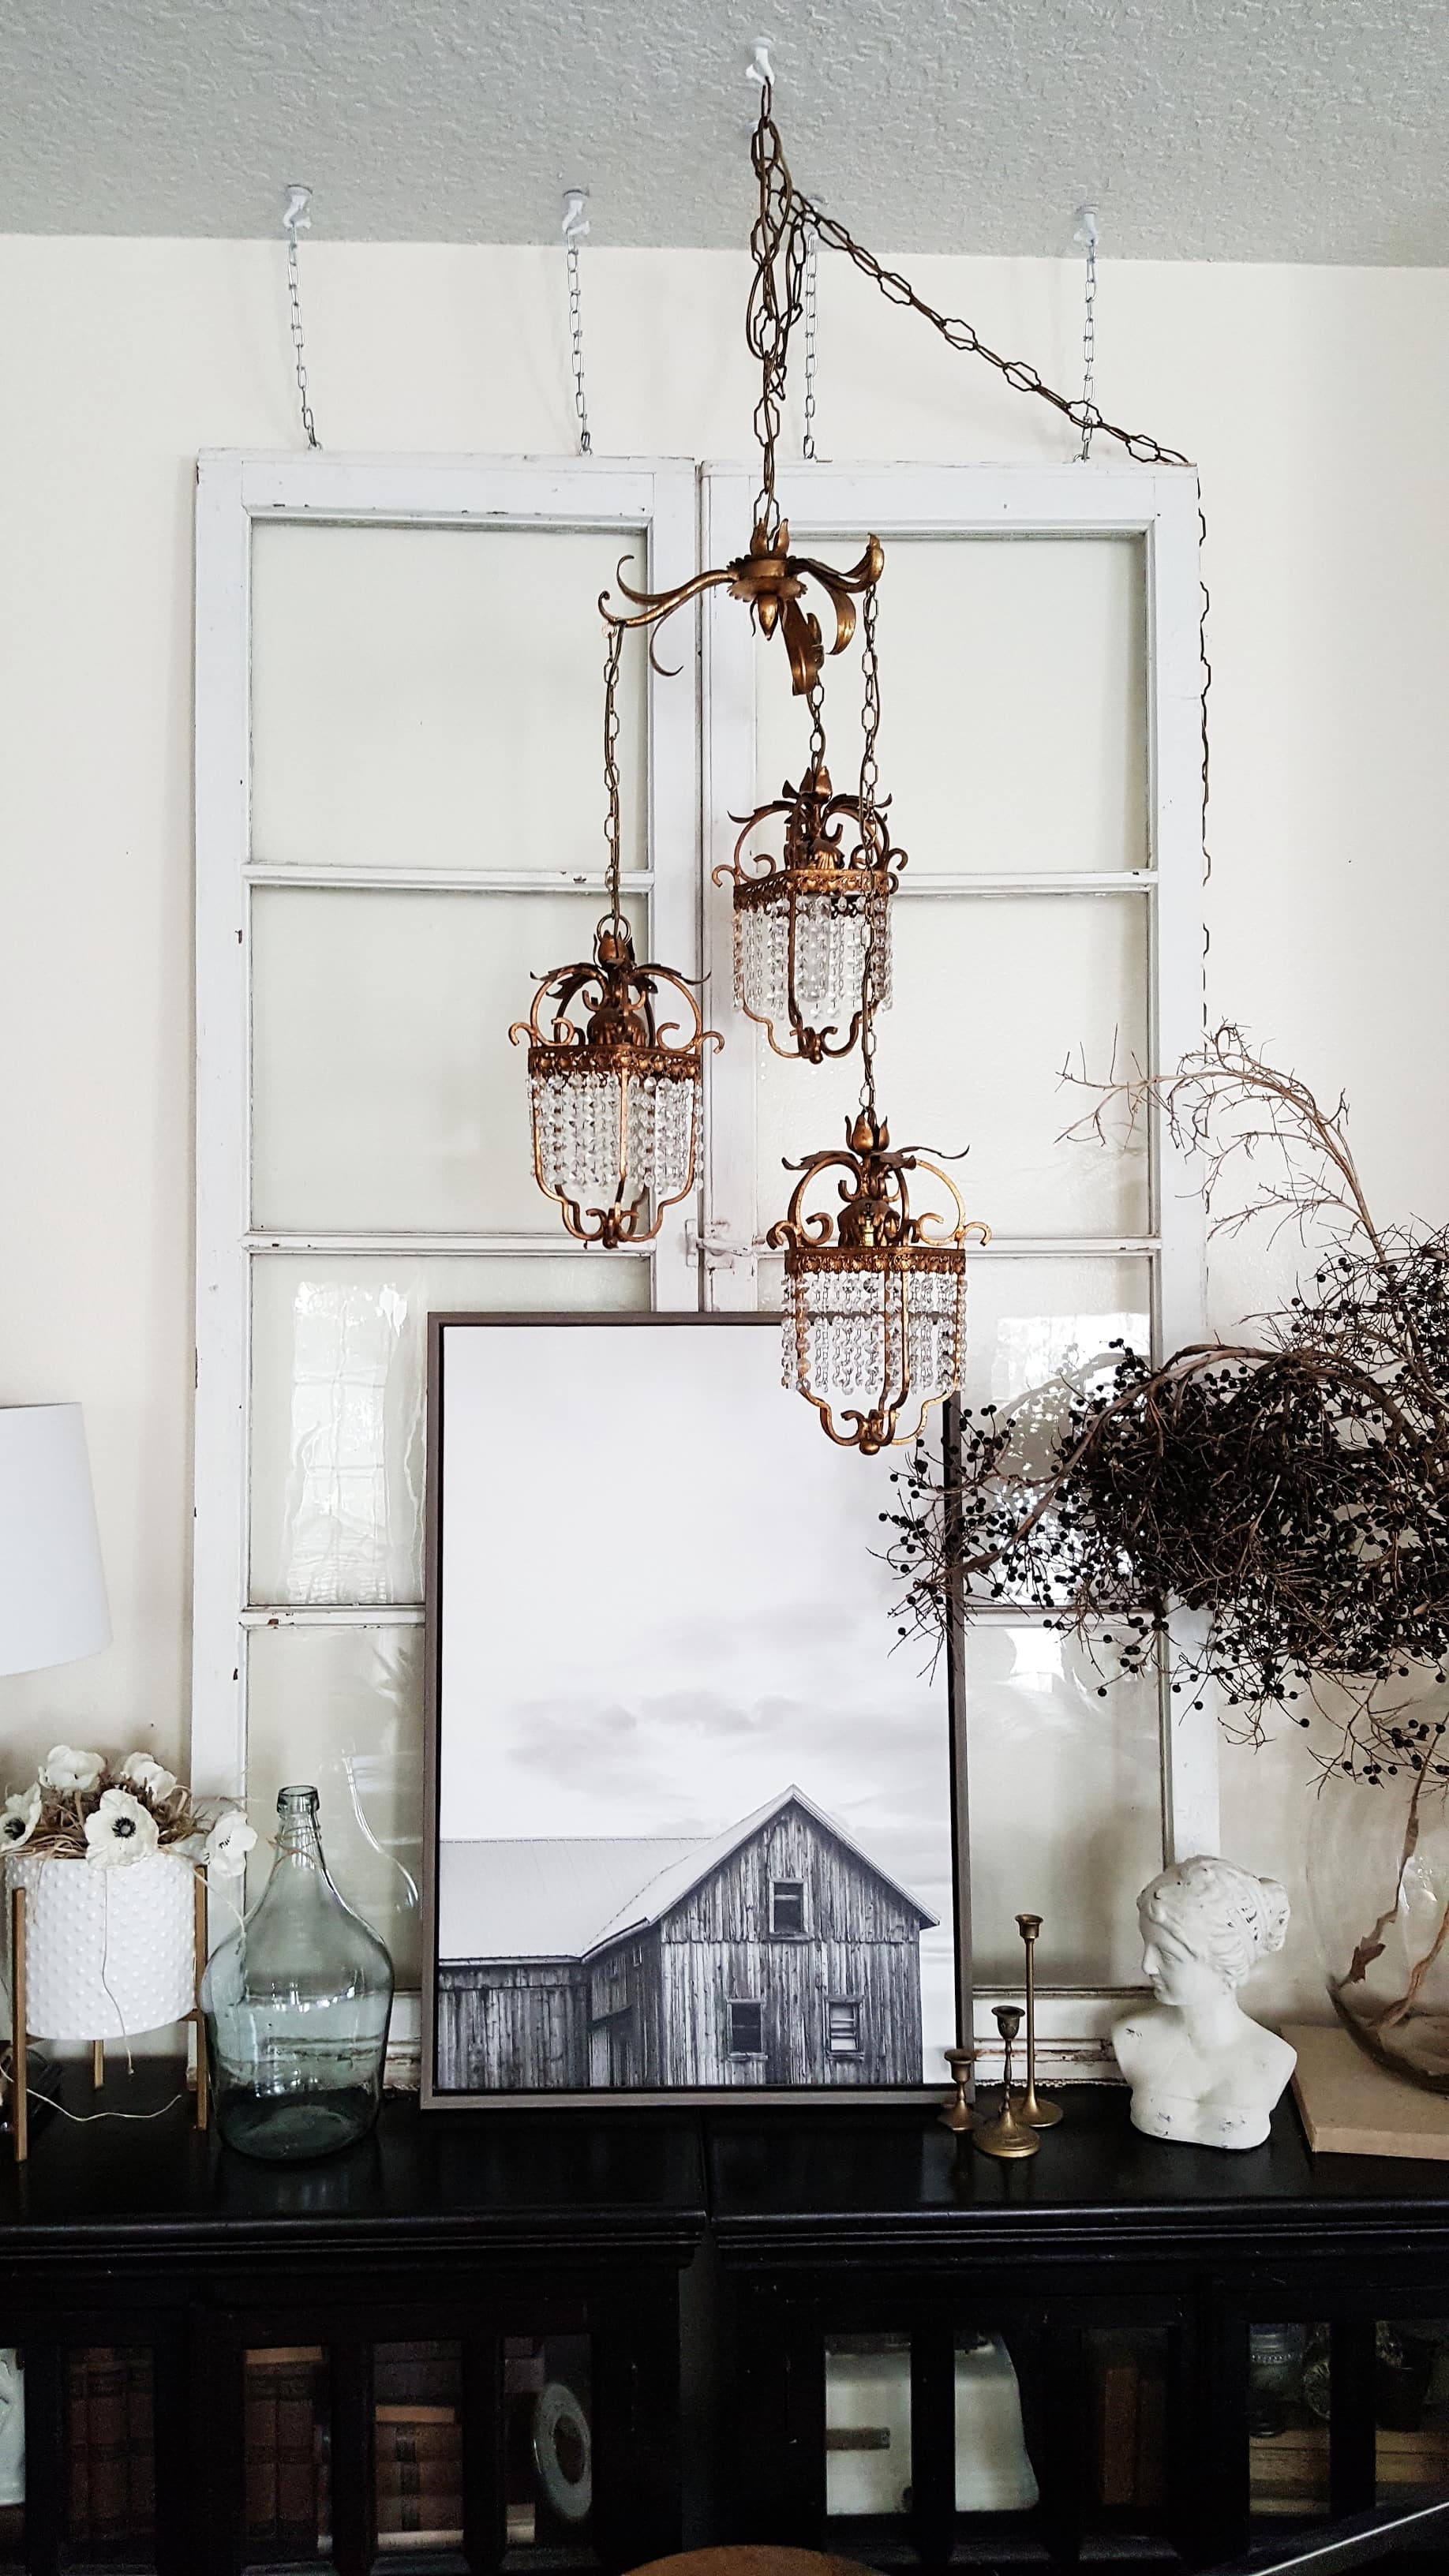 Modern Farmhouse Eclectic Industrial Decor Design Vintage Doors Chandelier Antiques Rugs Living Room Inspiration Black and White Scandinavian Decor Decorating ideas Fall Winter